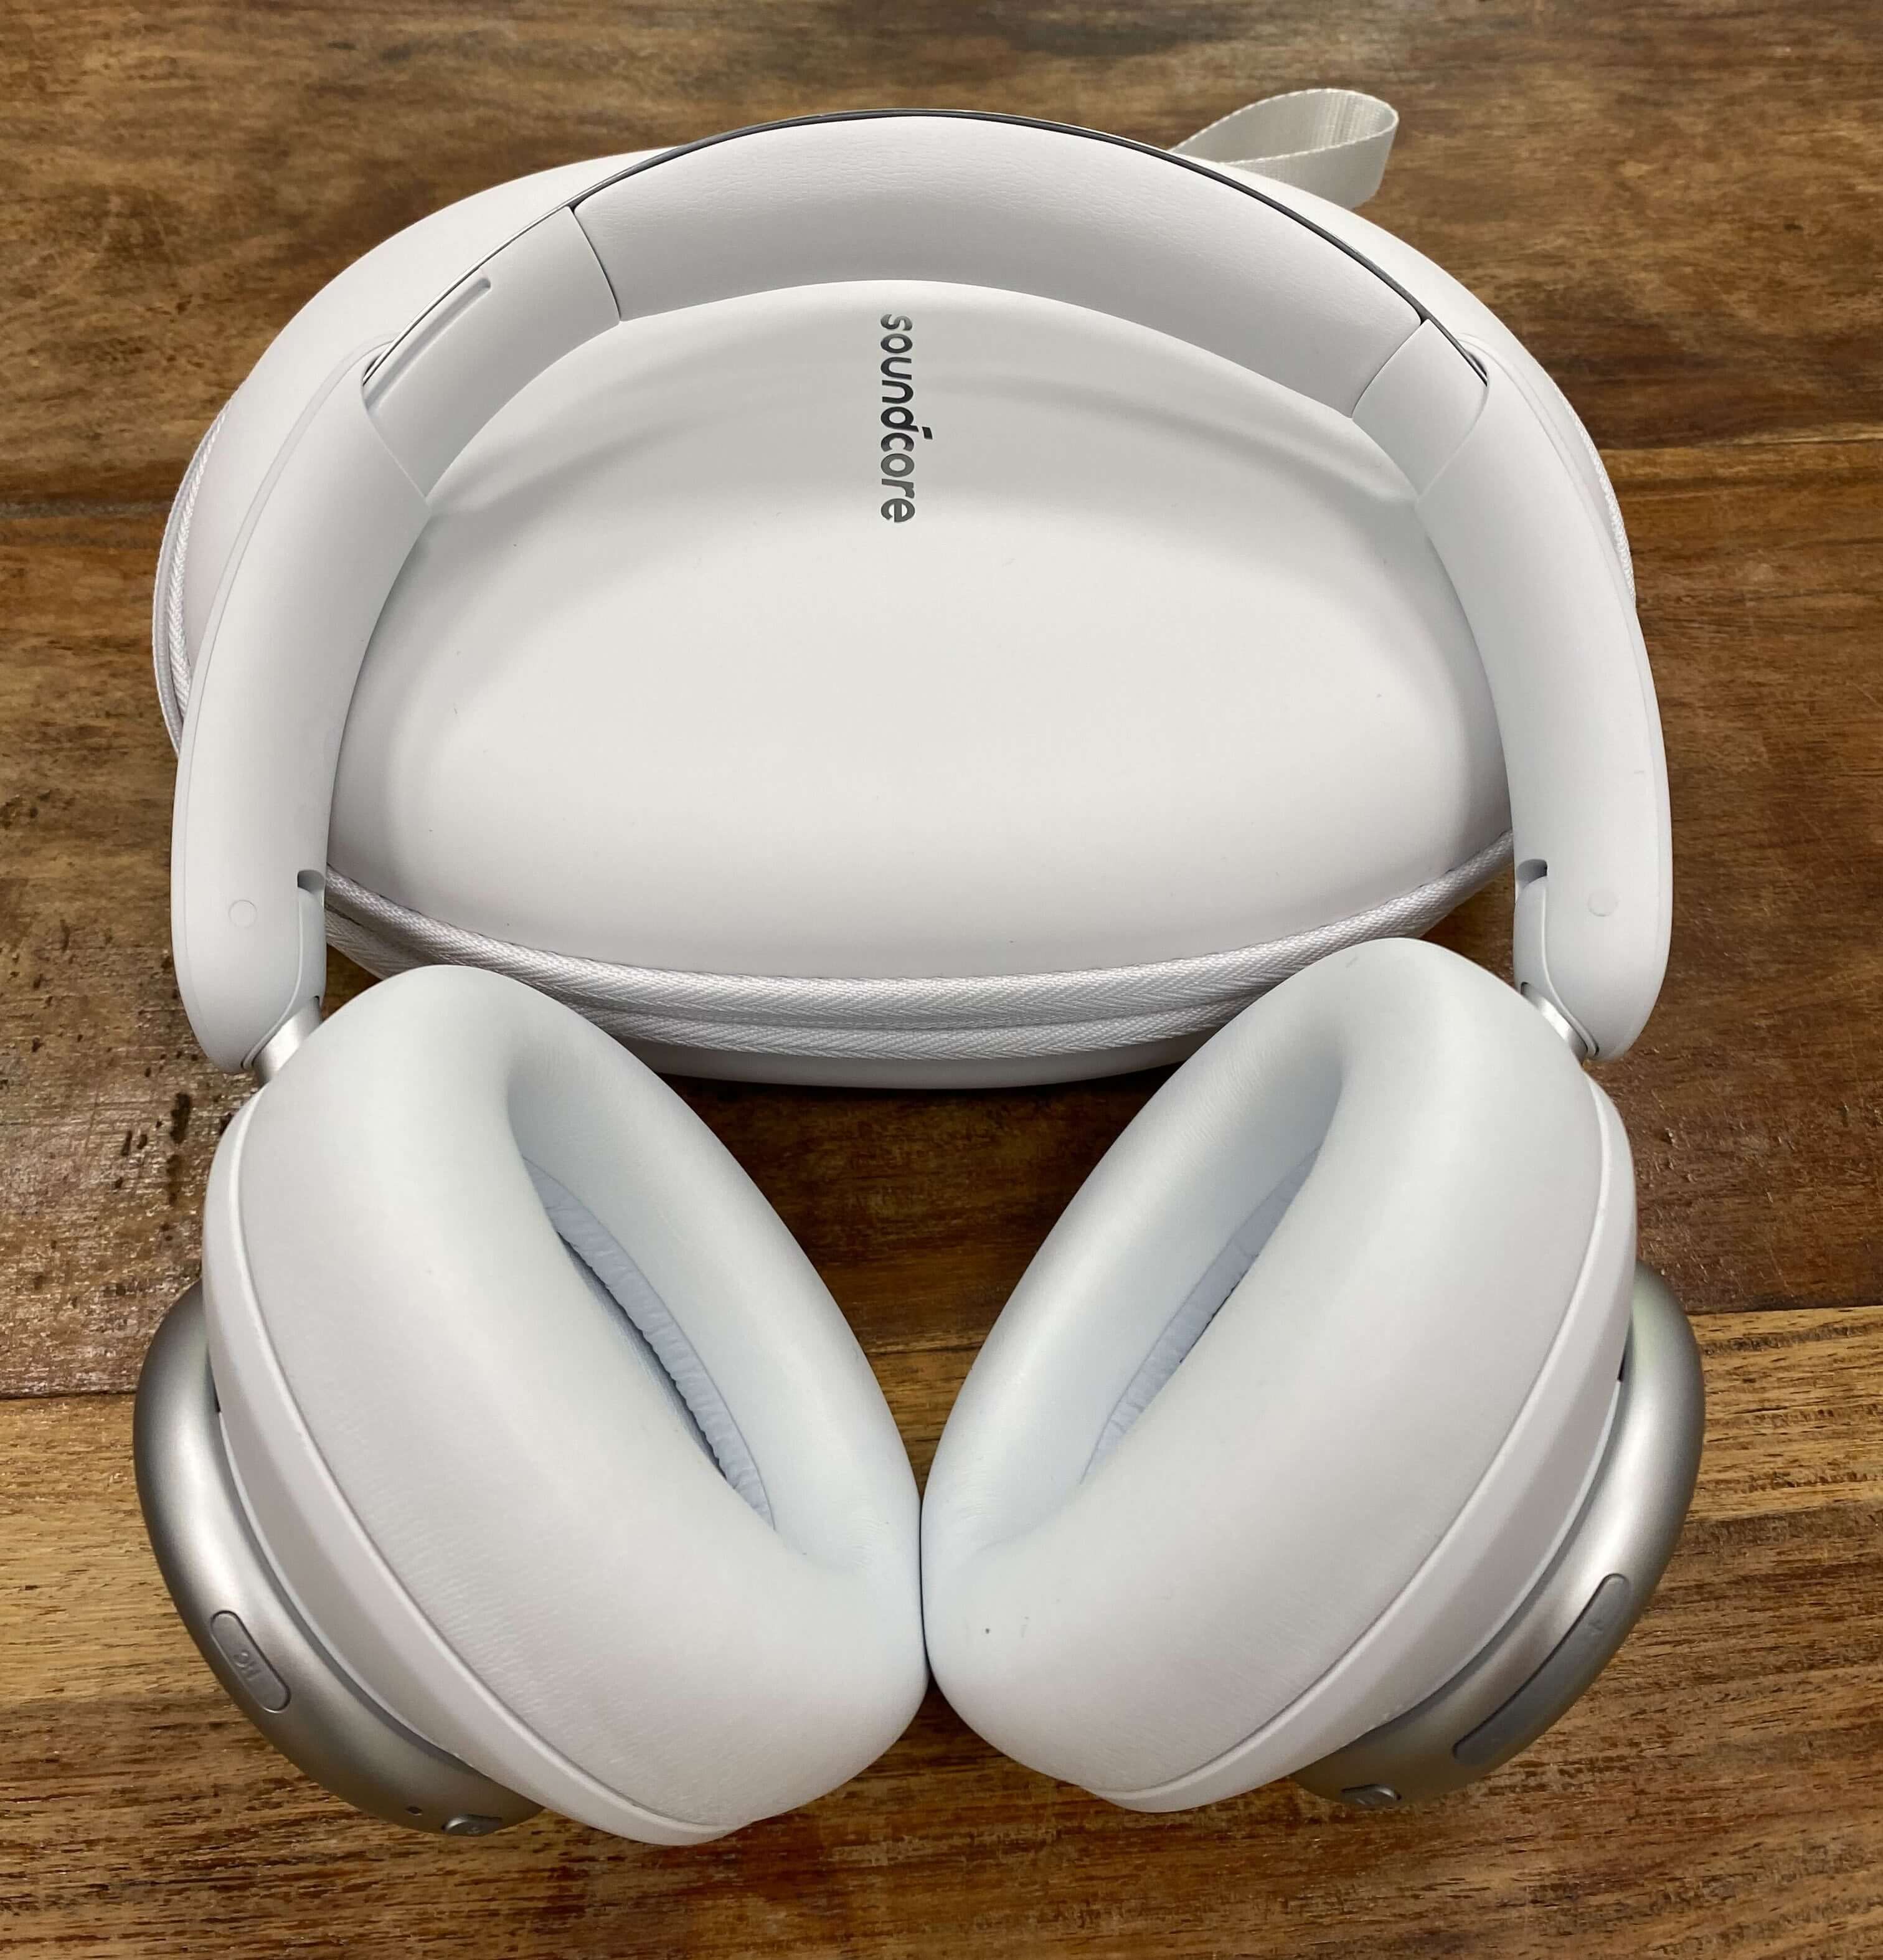 Soundcore Space Q45 Review - An Amazing Value For Frequent Flyers 